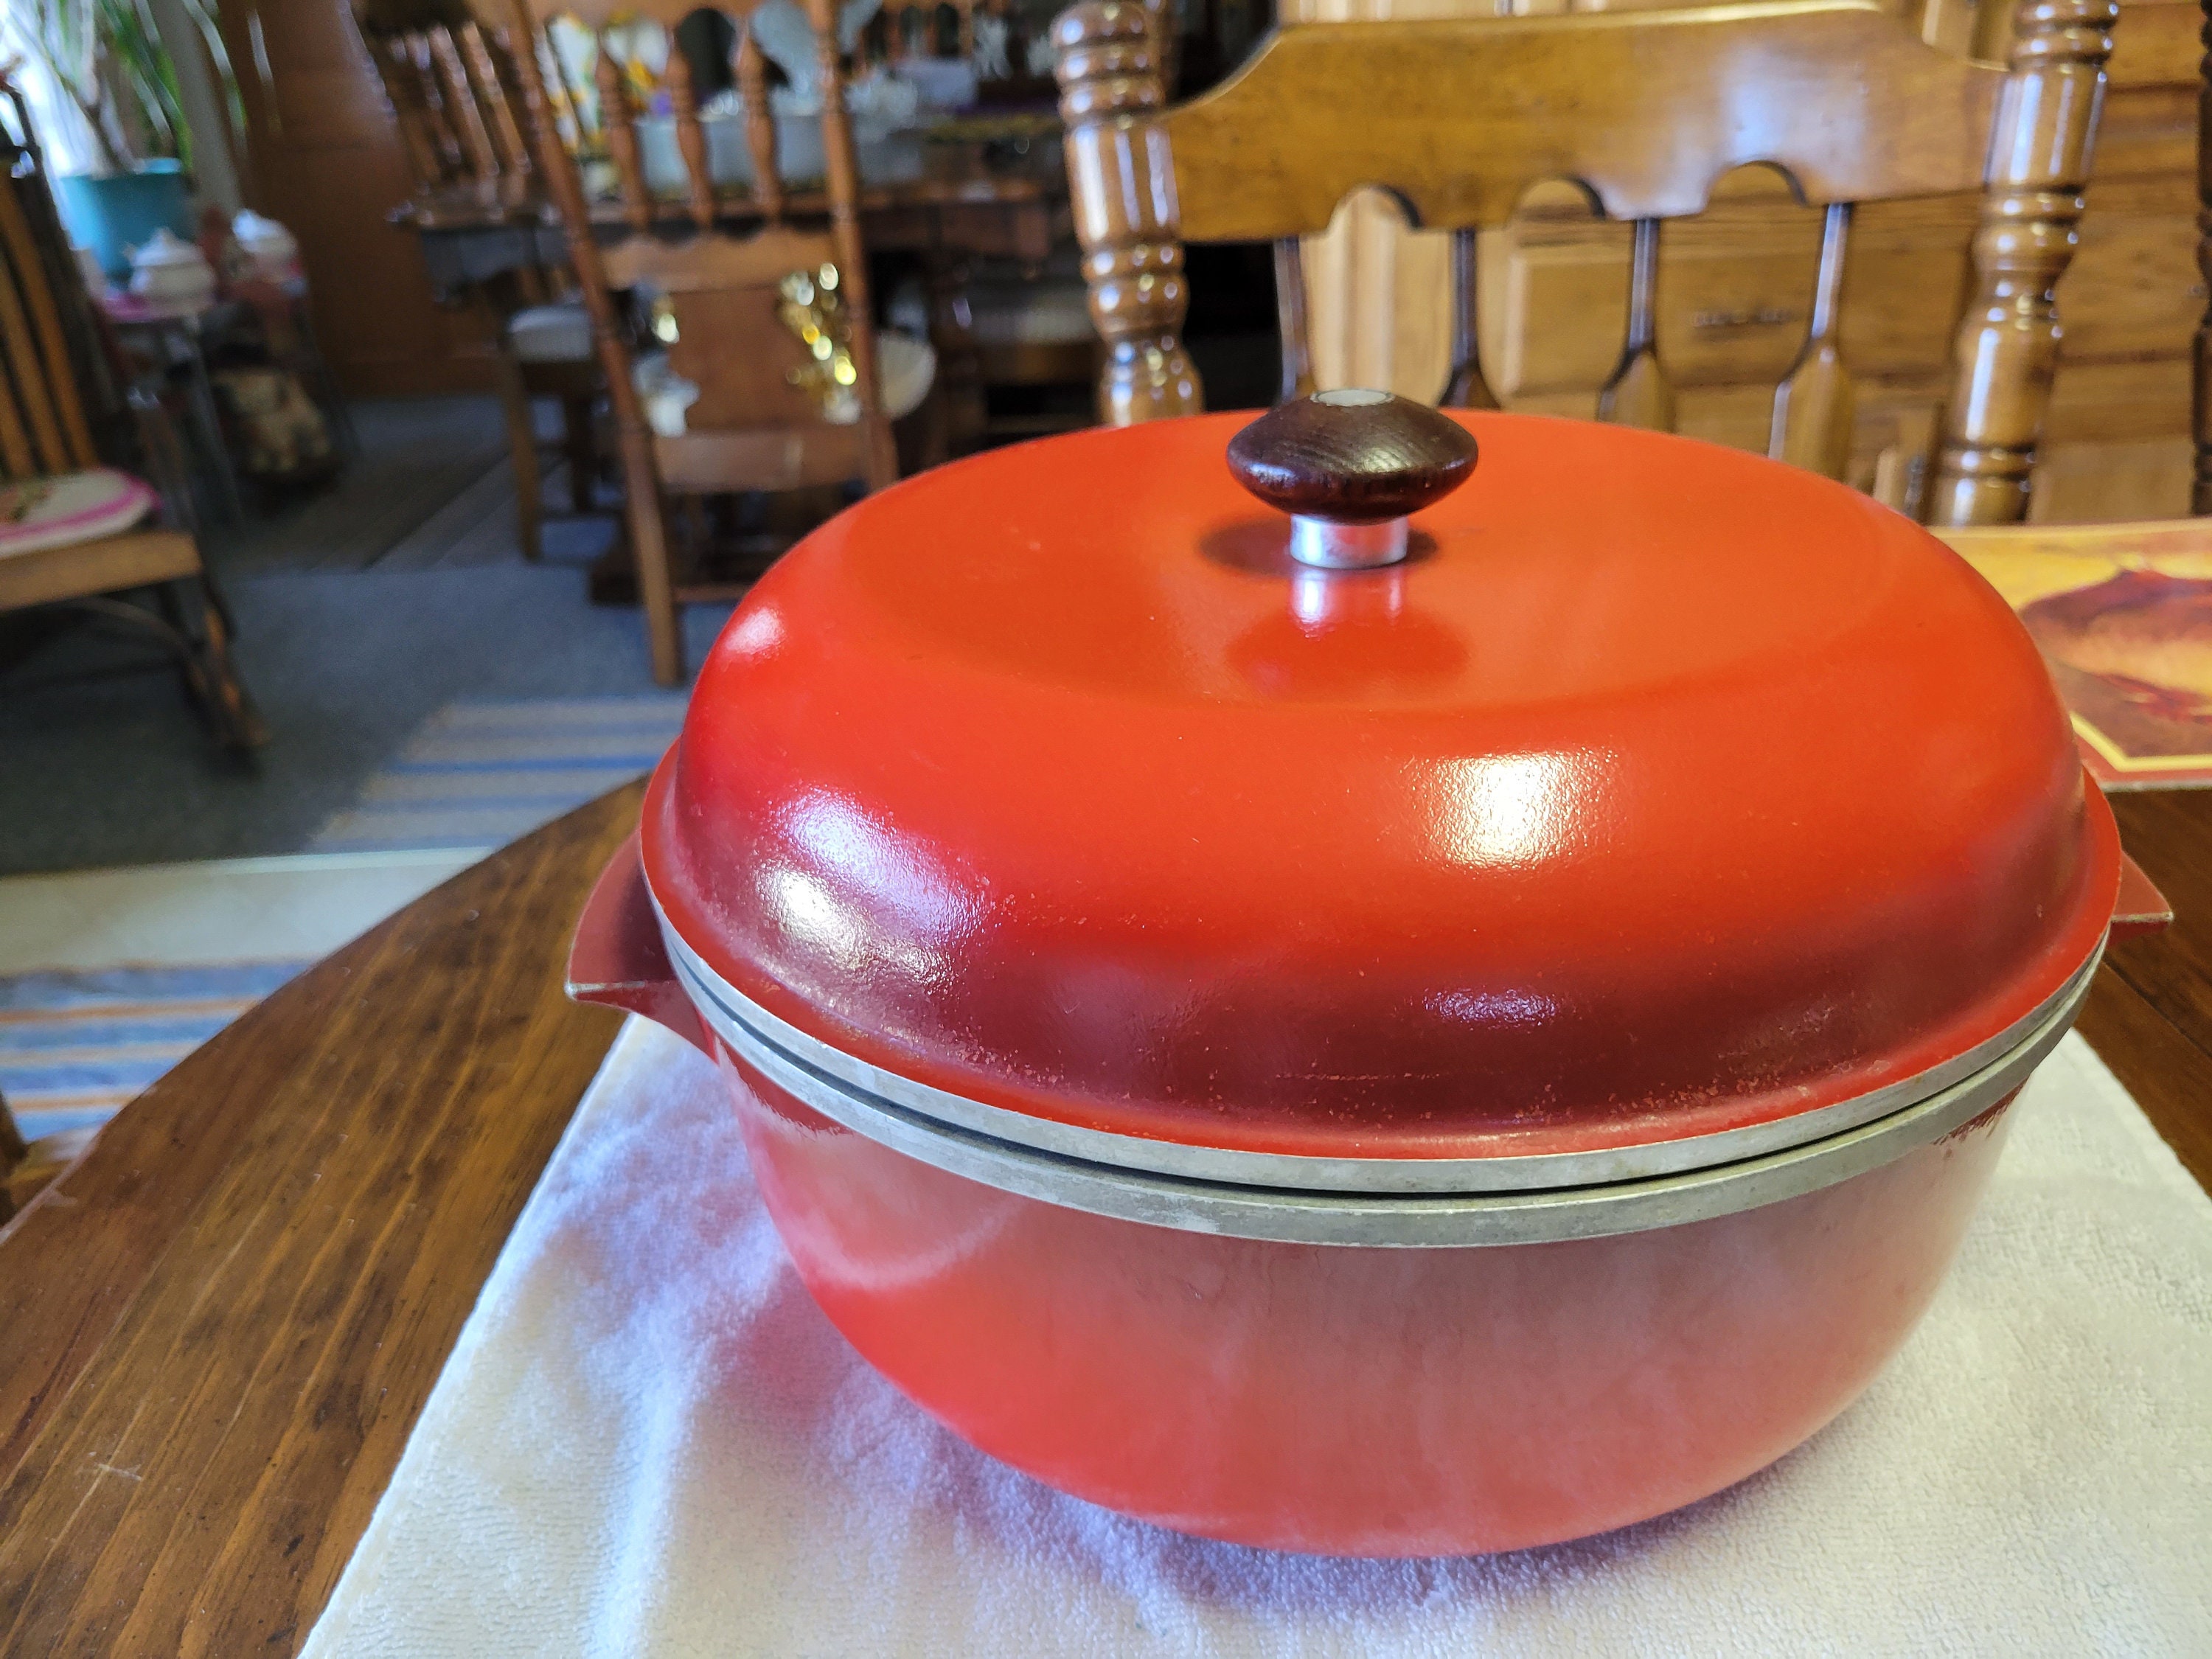 Aluminum Dutch Oven Pot with Glass Lid Granit ultra (red)